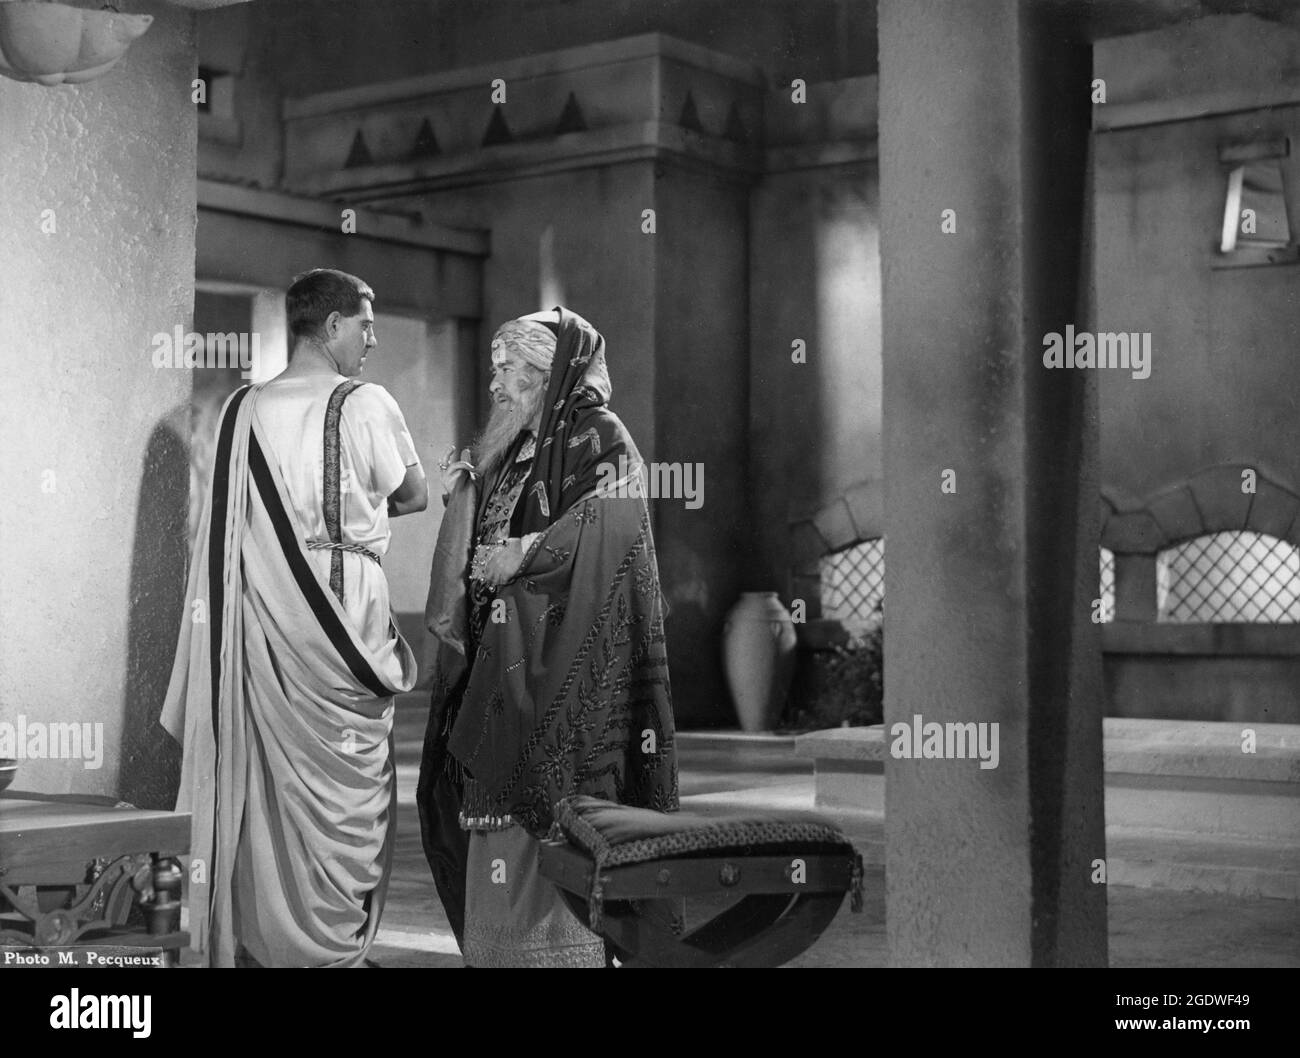 JEAN GABIN as Pontius Pilate and CHARLES GRANVAL as Caiaphas in GOLGOTHA aka BEHOLD THE MAN (in US) 1935 director / writer JULIEN DUVIVIER music Jacques Ibert production design Jean Perrier costume design Jacques-Philippe Heuze  Ichtys Film Stock Photo